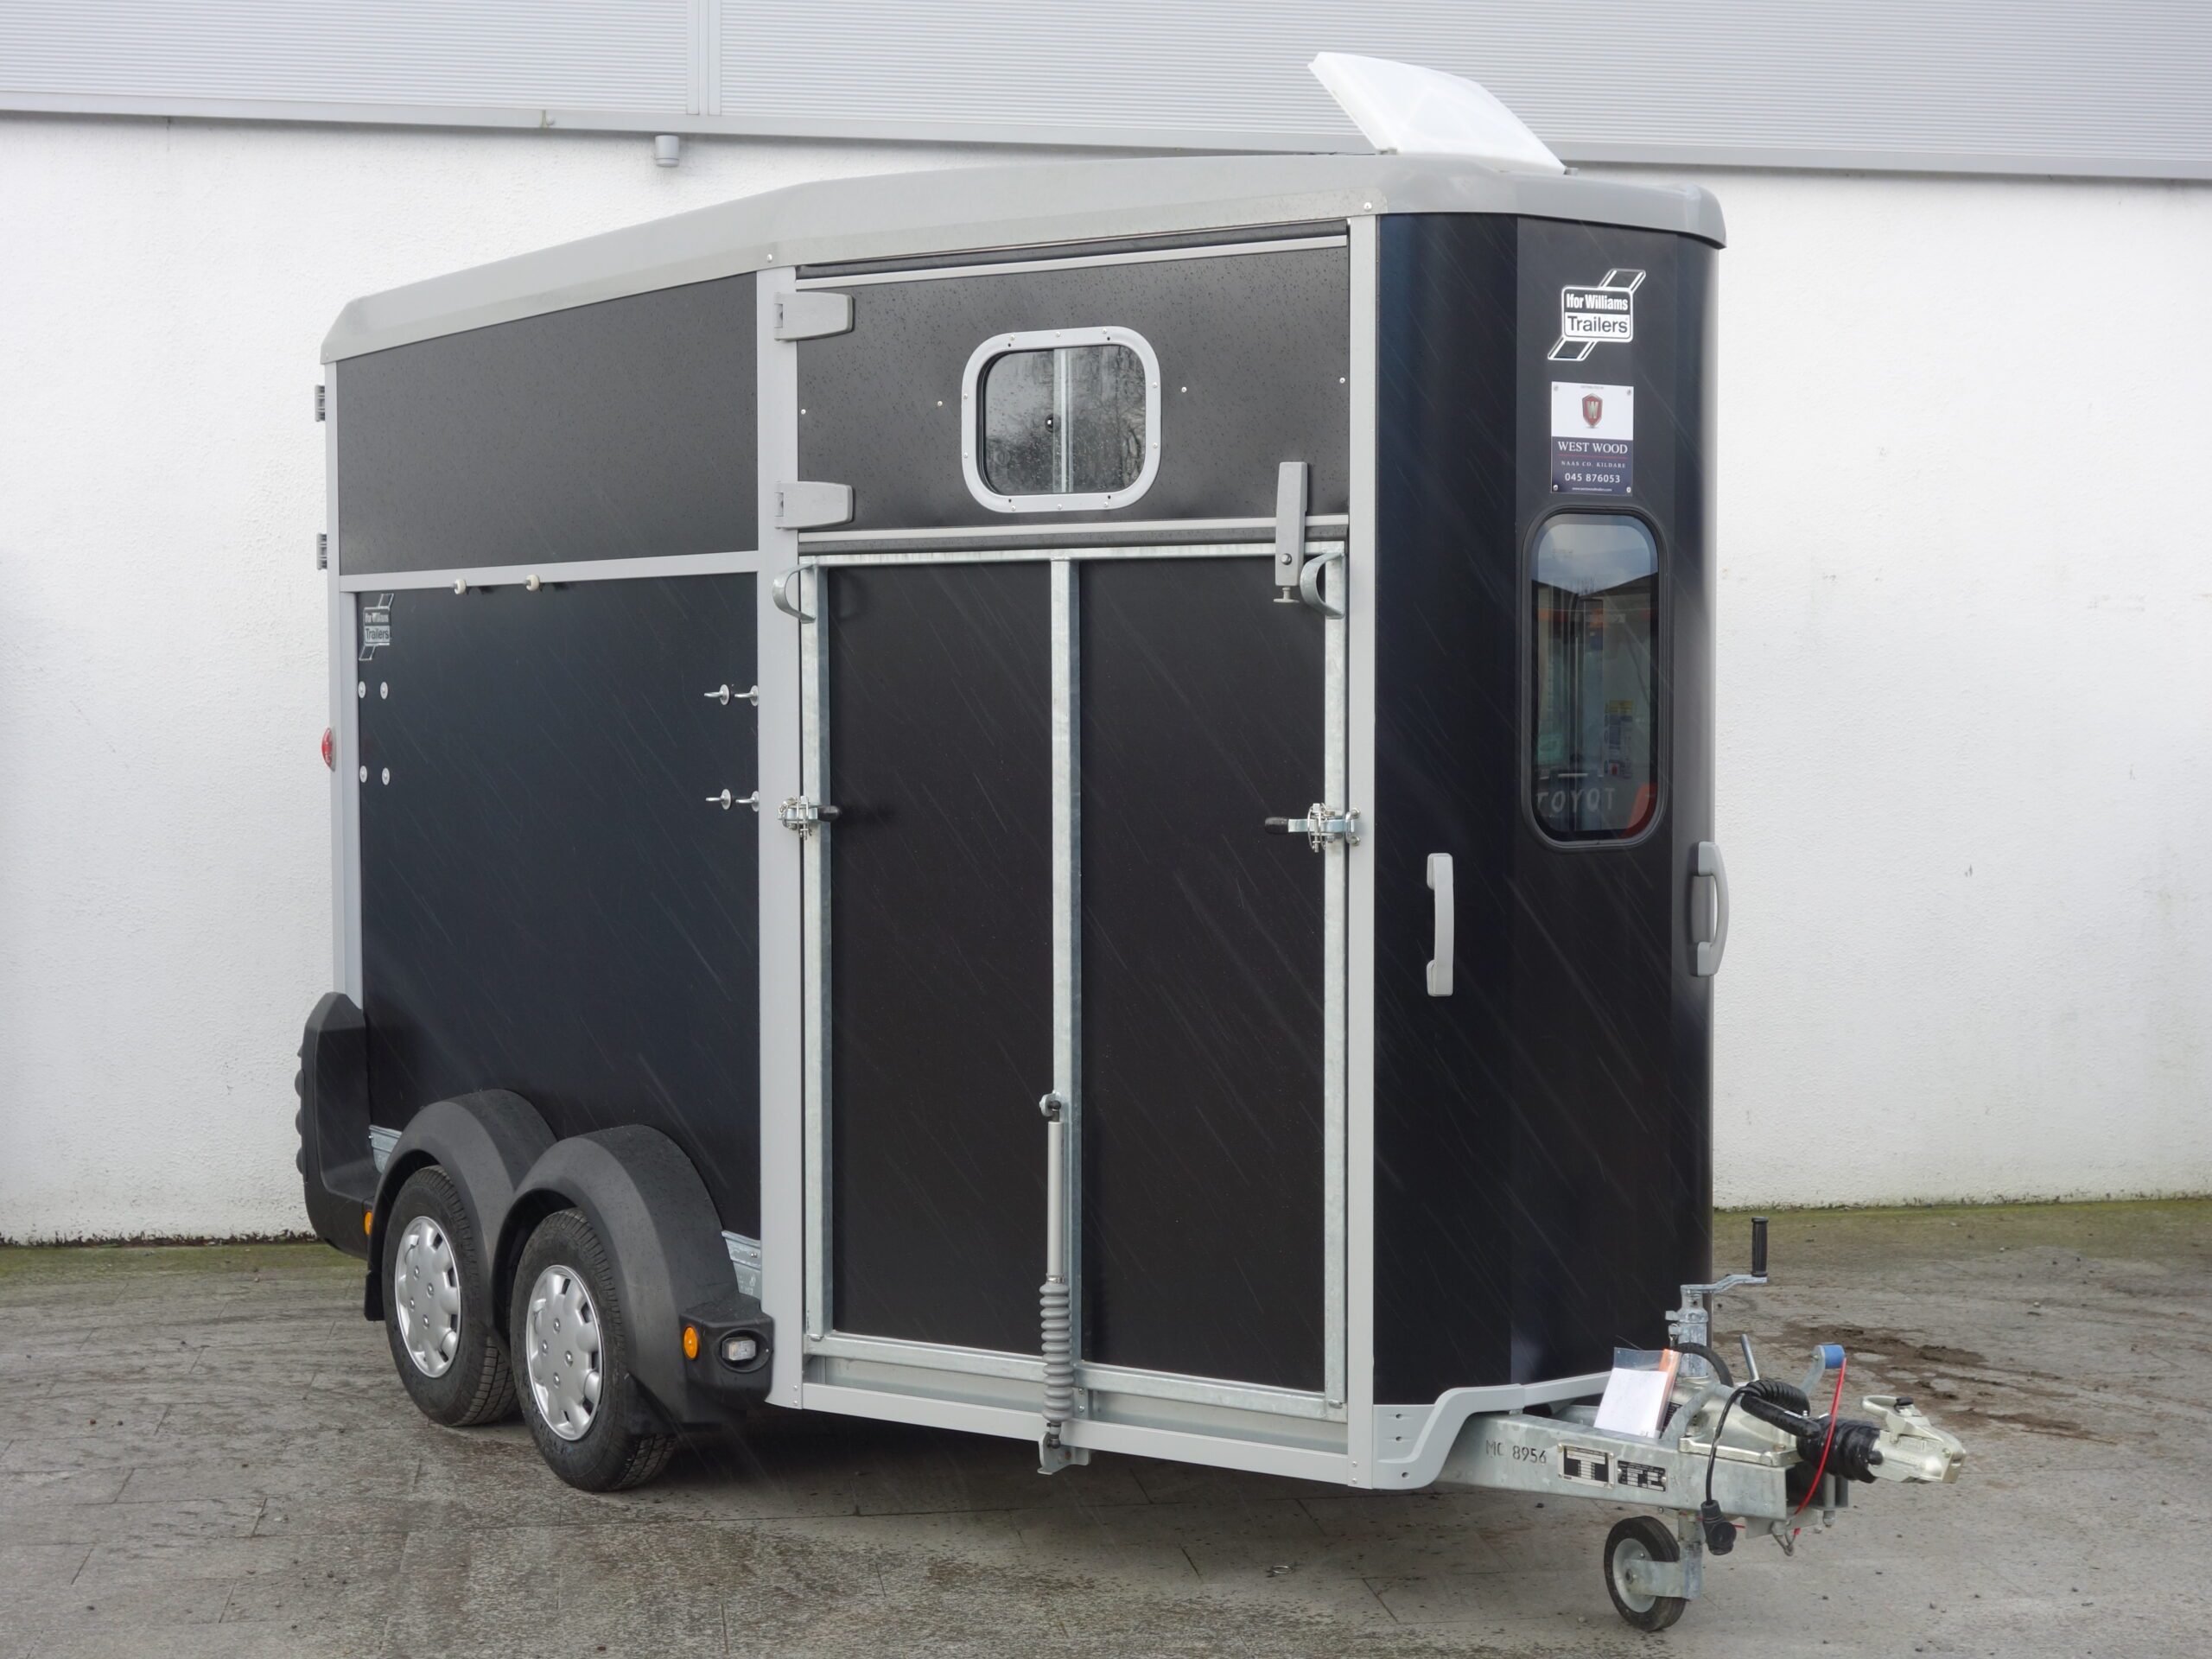 T09436: Used Demo HB511 Large Horsebox with S/Windows and W/Trims ( Black)